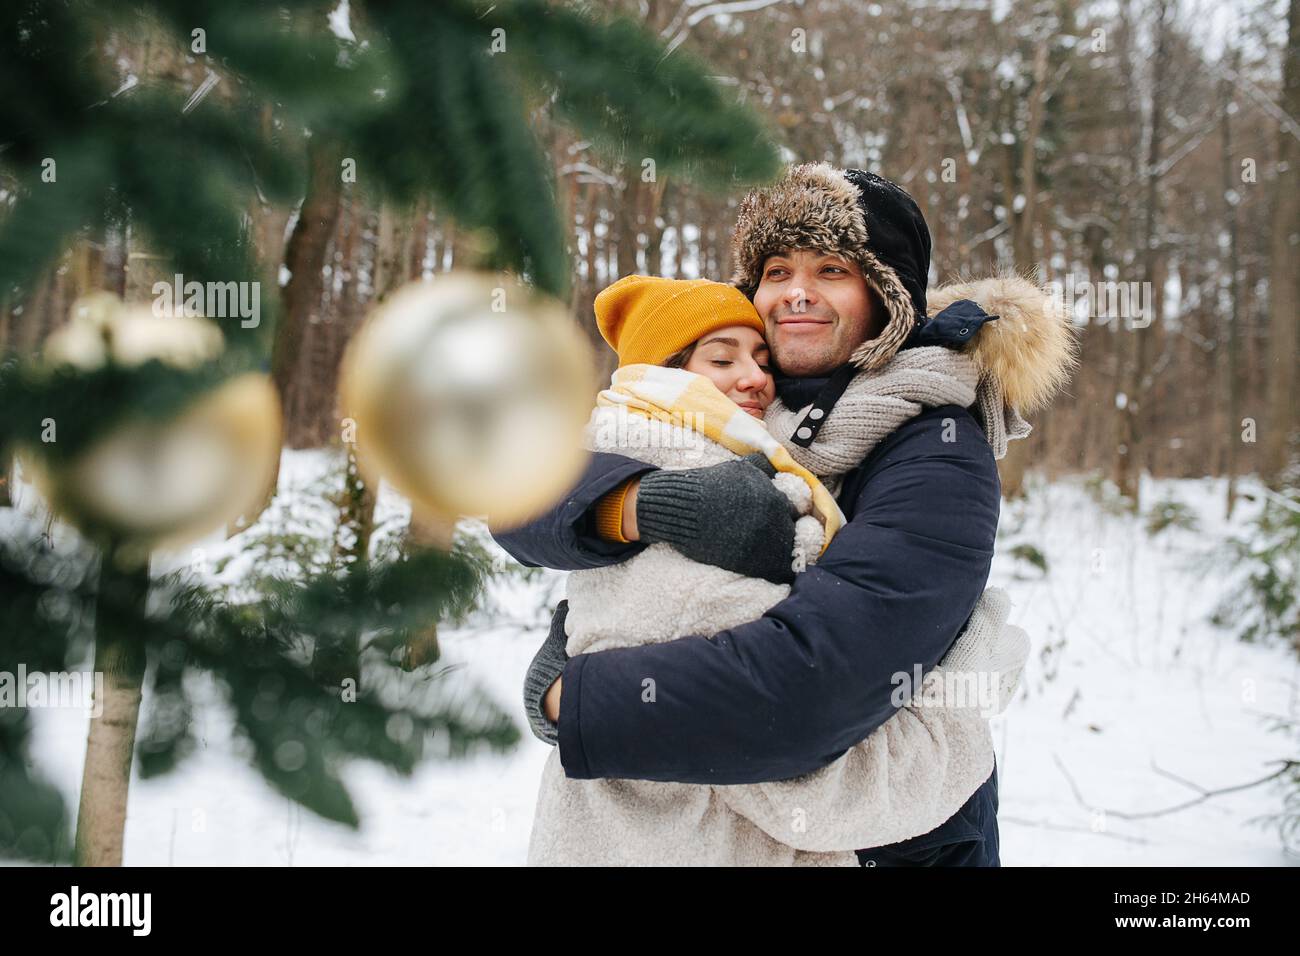 Loving couple in winter, hug standing behind a decorated Christmas tree.  Stock Photo